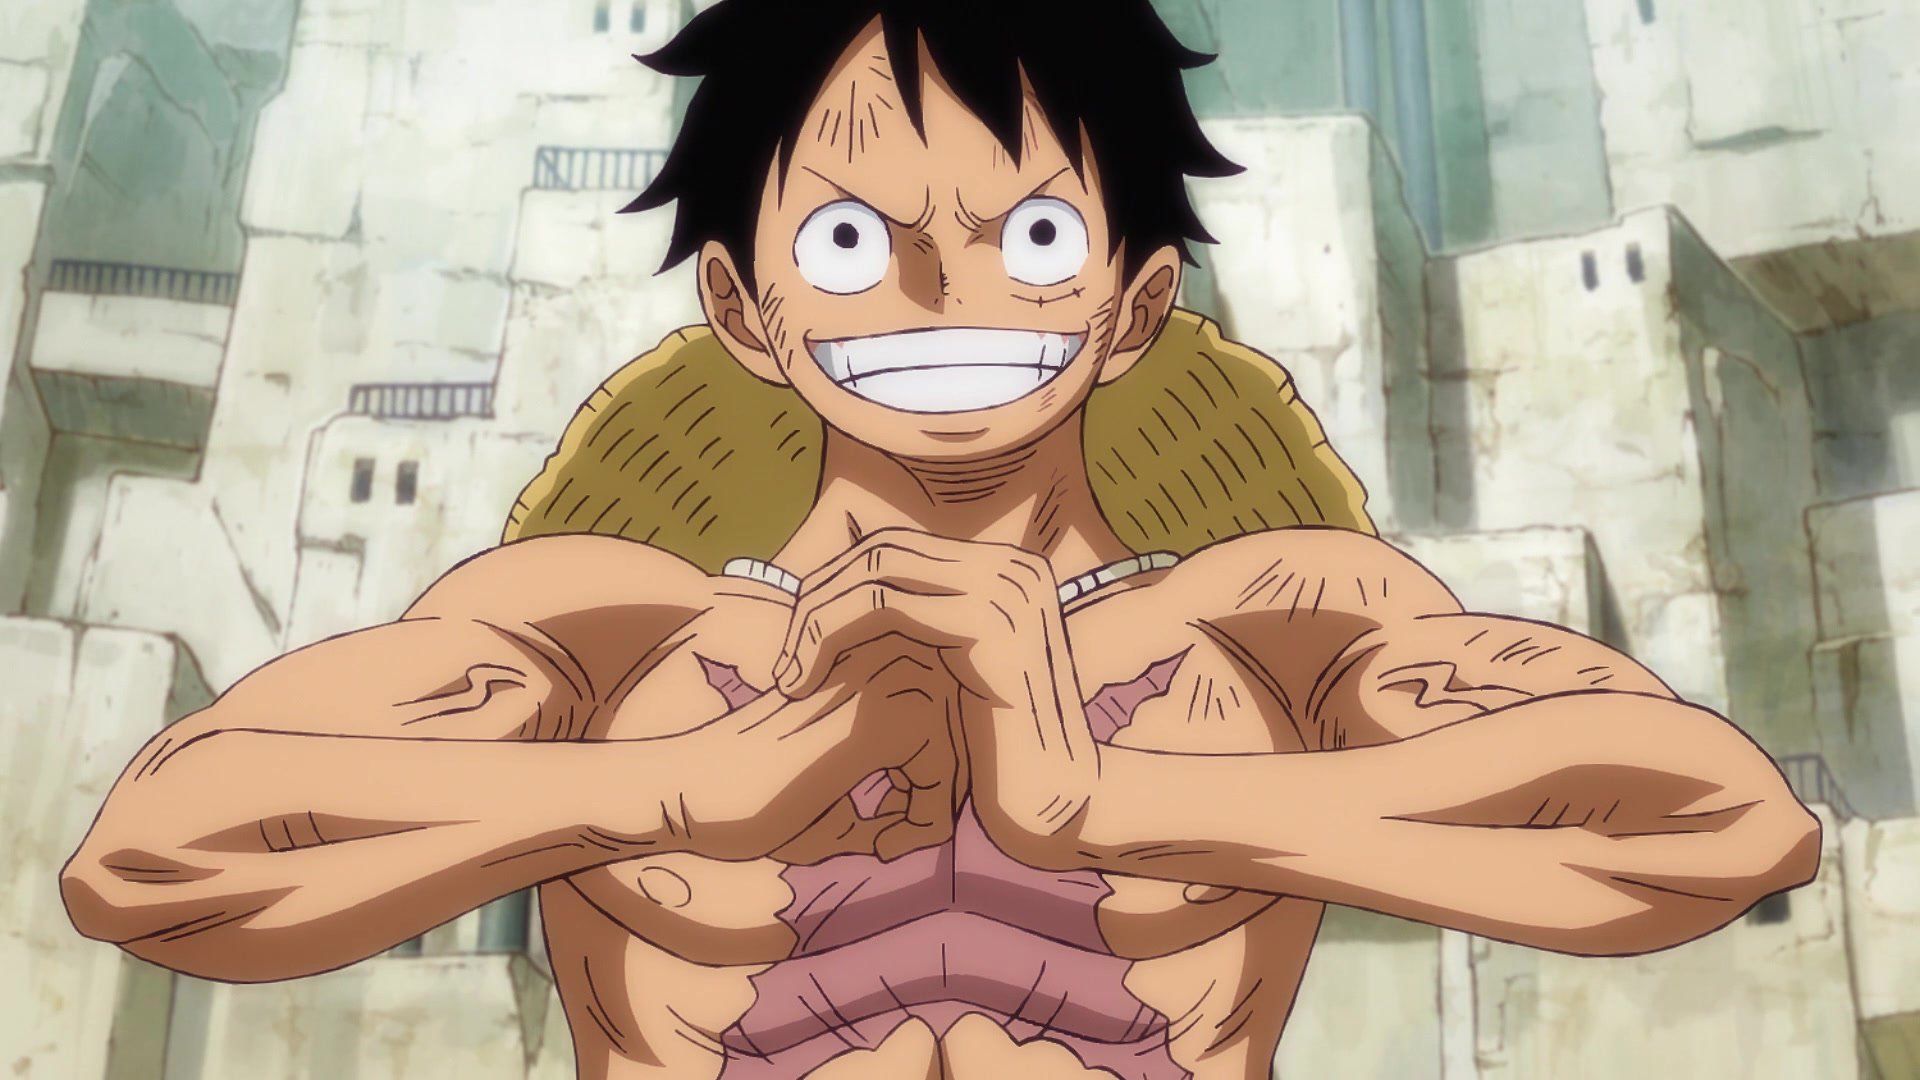 World's first-ever One Piece gym aims to turn you into a smokin' hot Straw  Hat Pirate | ONE Esports